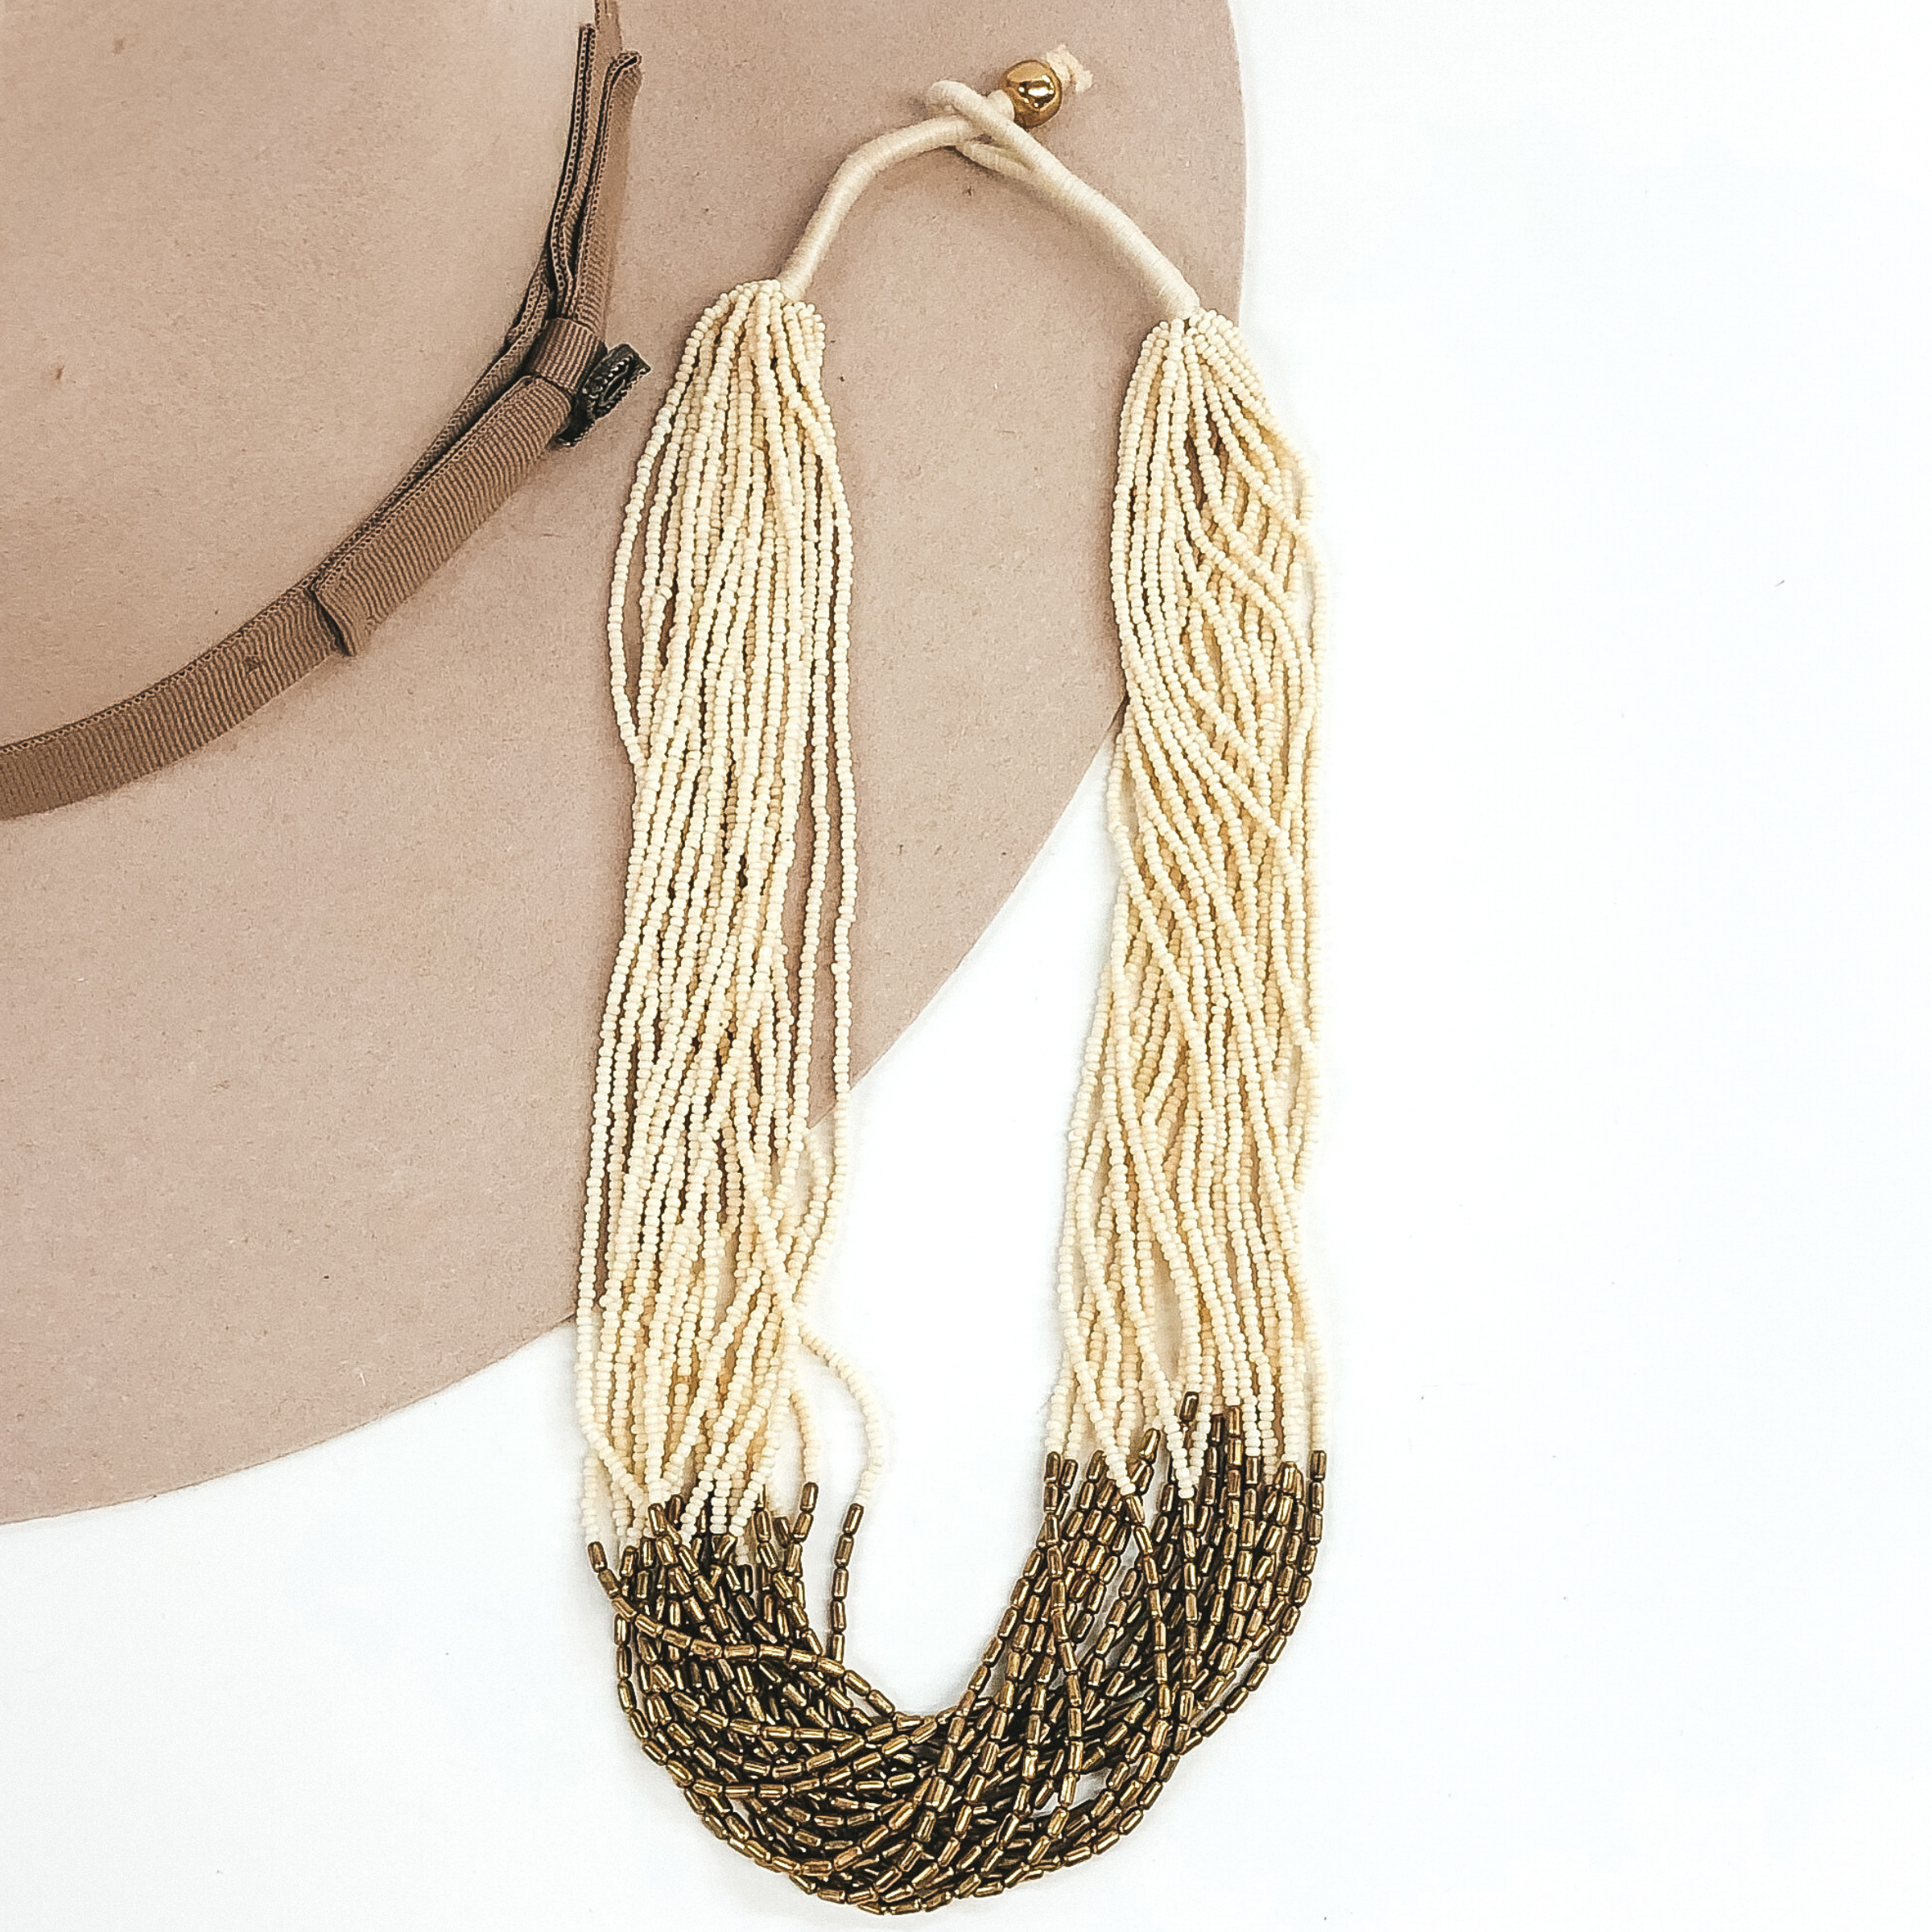 The strands on this necklace have ivory beads and gold beads in the middle of the string. There are a lot of single strings put together to make a single necklace. The necklace has a gold bead that goes through a loop to put the necklace on. This necklace is pictured laying on a beige hat on a white background. 